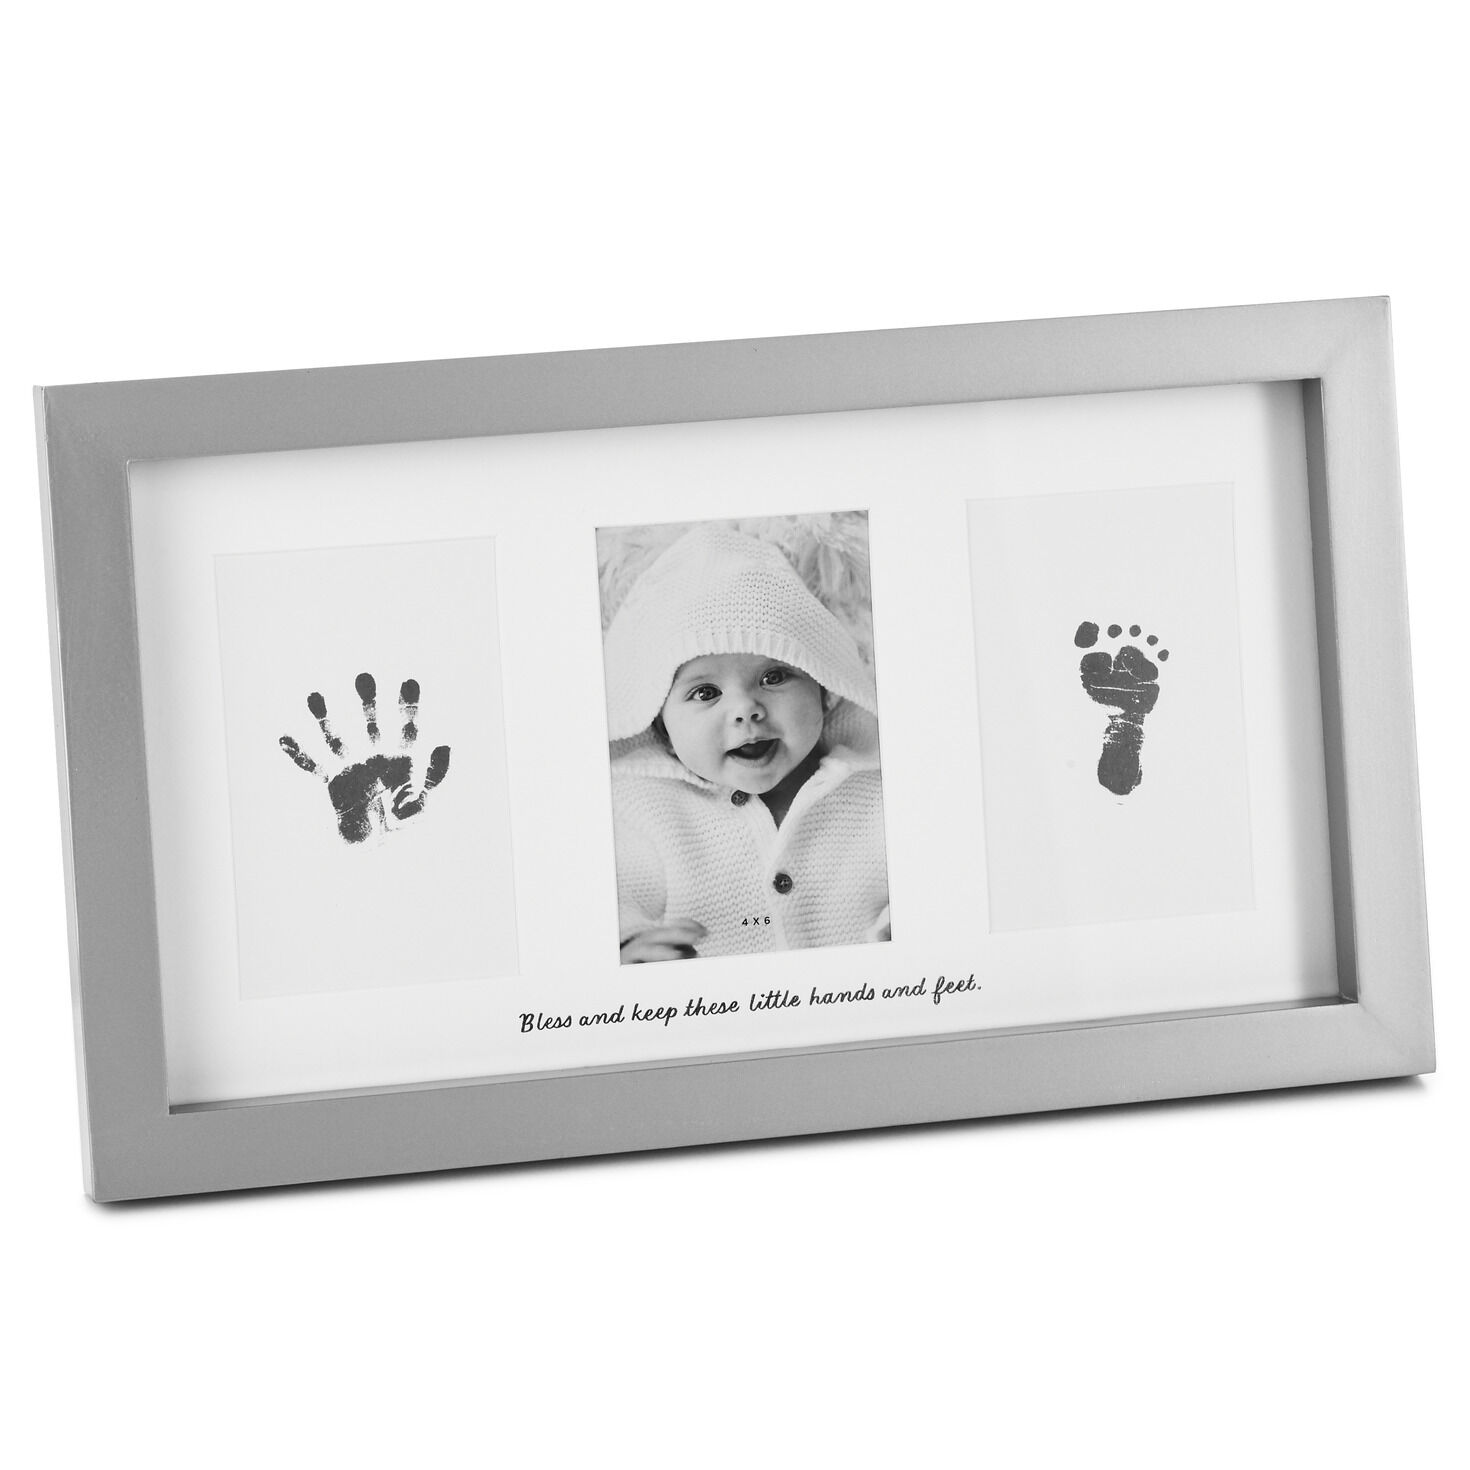 show original title Details about   Jané photo frame for baby hand footprint and photography includes clay mo 